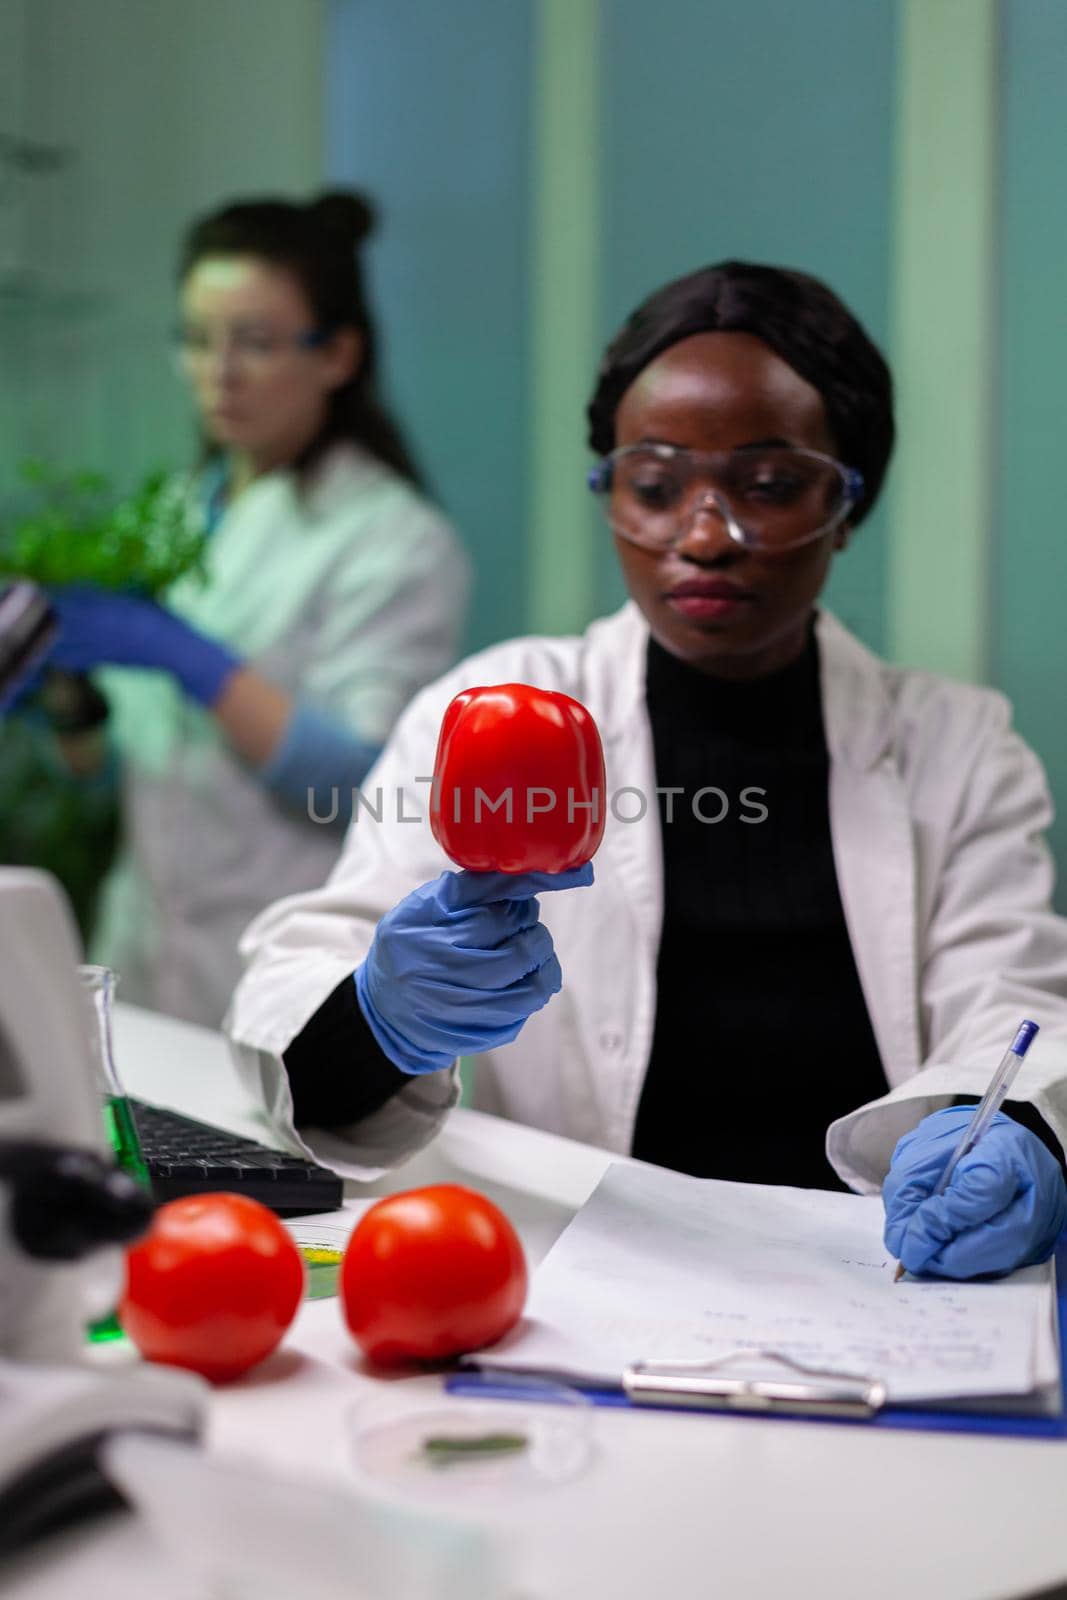 African american chemist reseacher doctor analyzing pepper injected with pesticides for scientific agriculture expertise. Biologist scientist working at farming experiment in microbiology laboratory